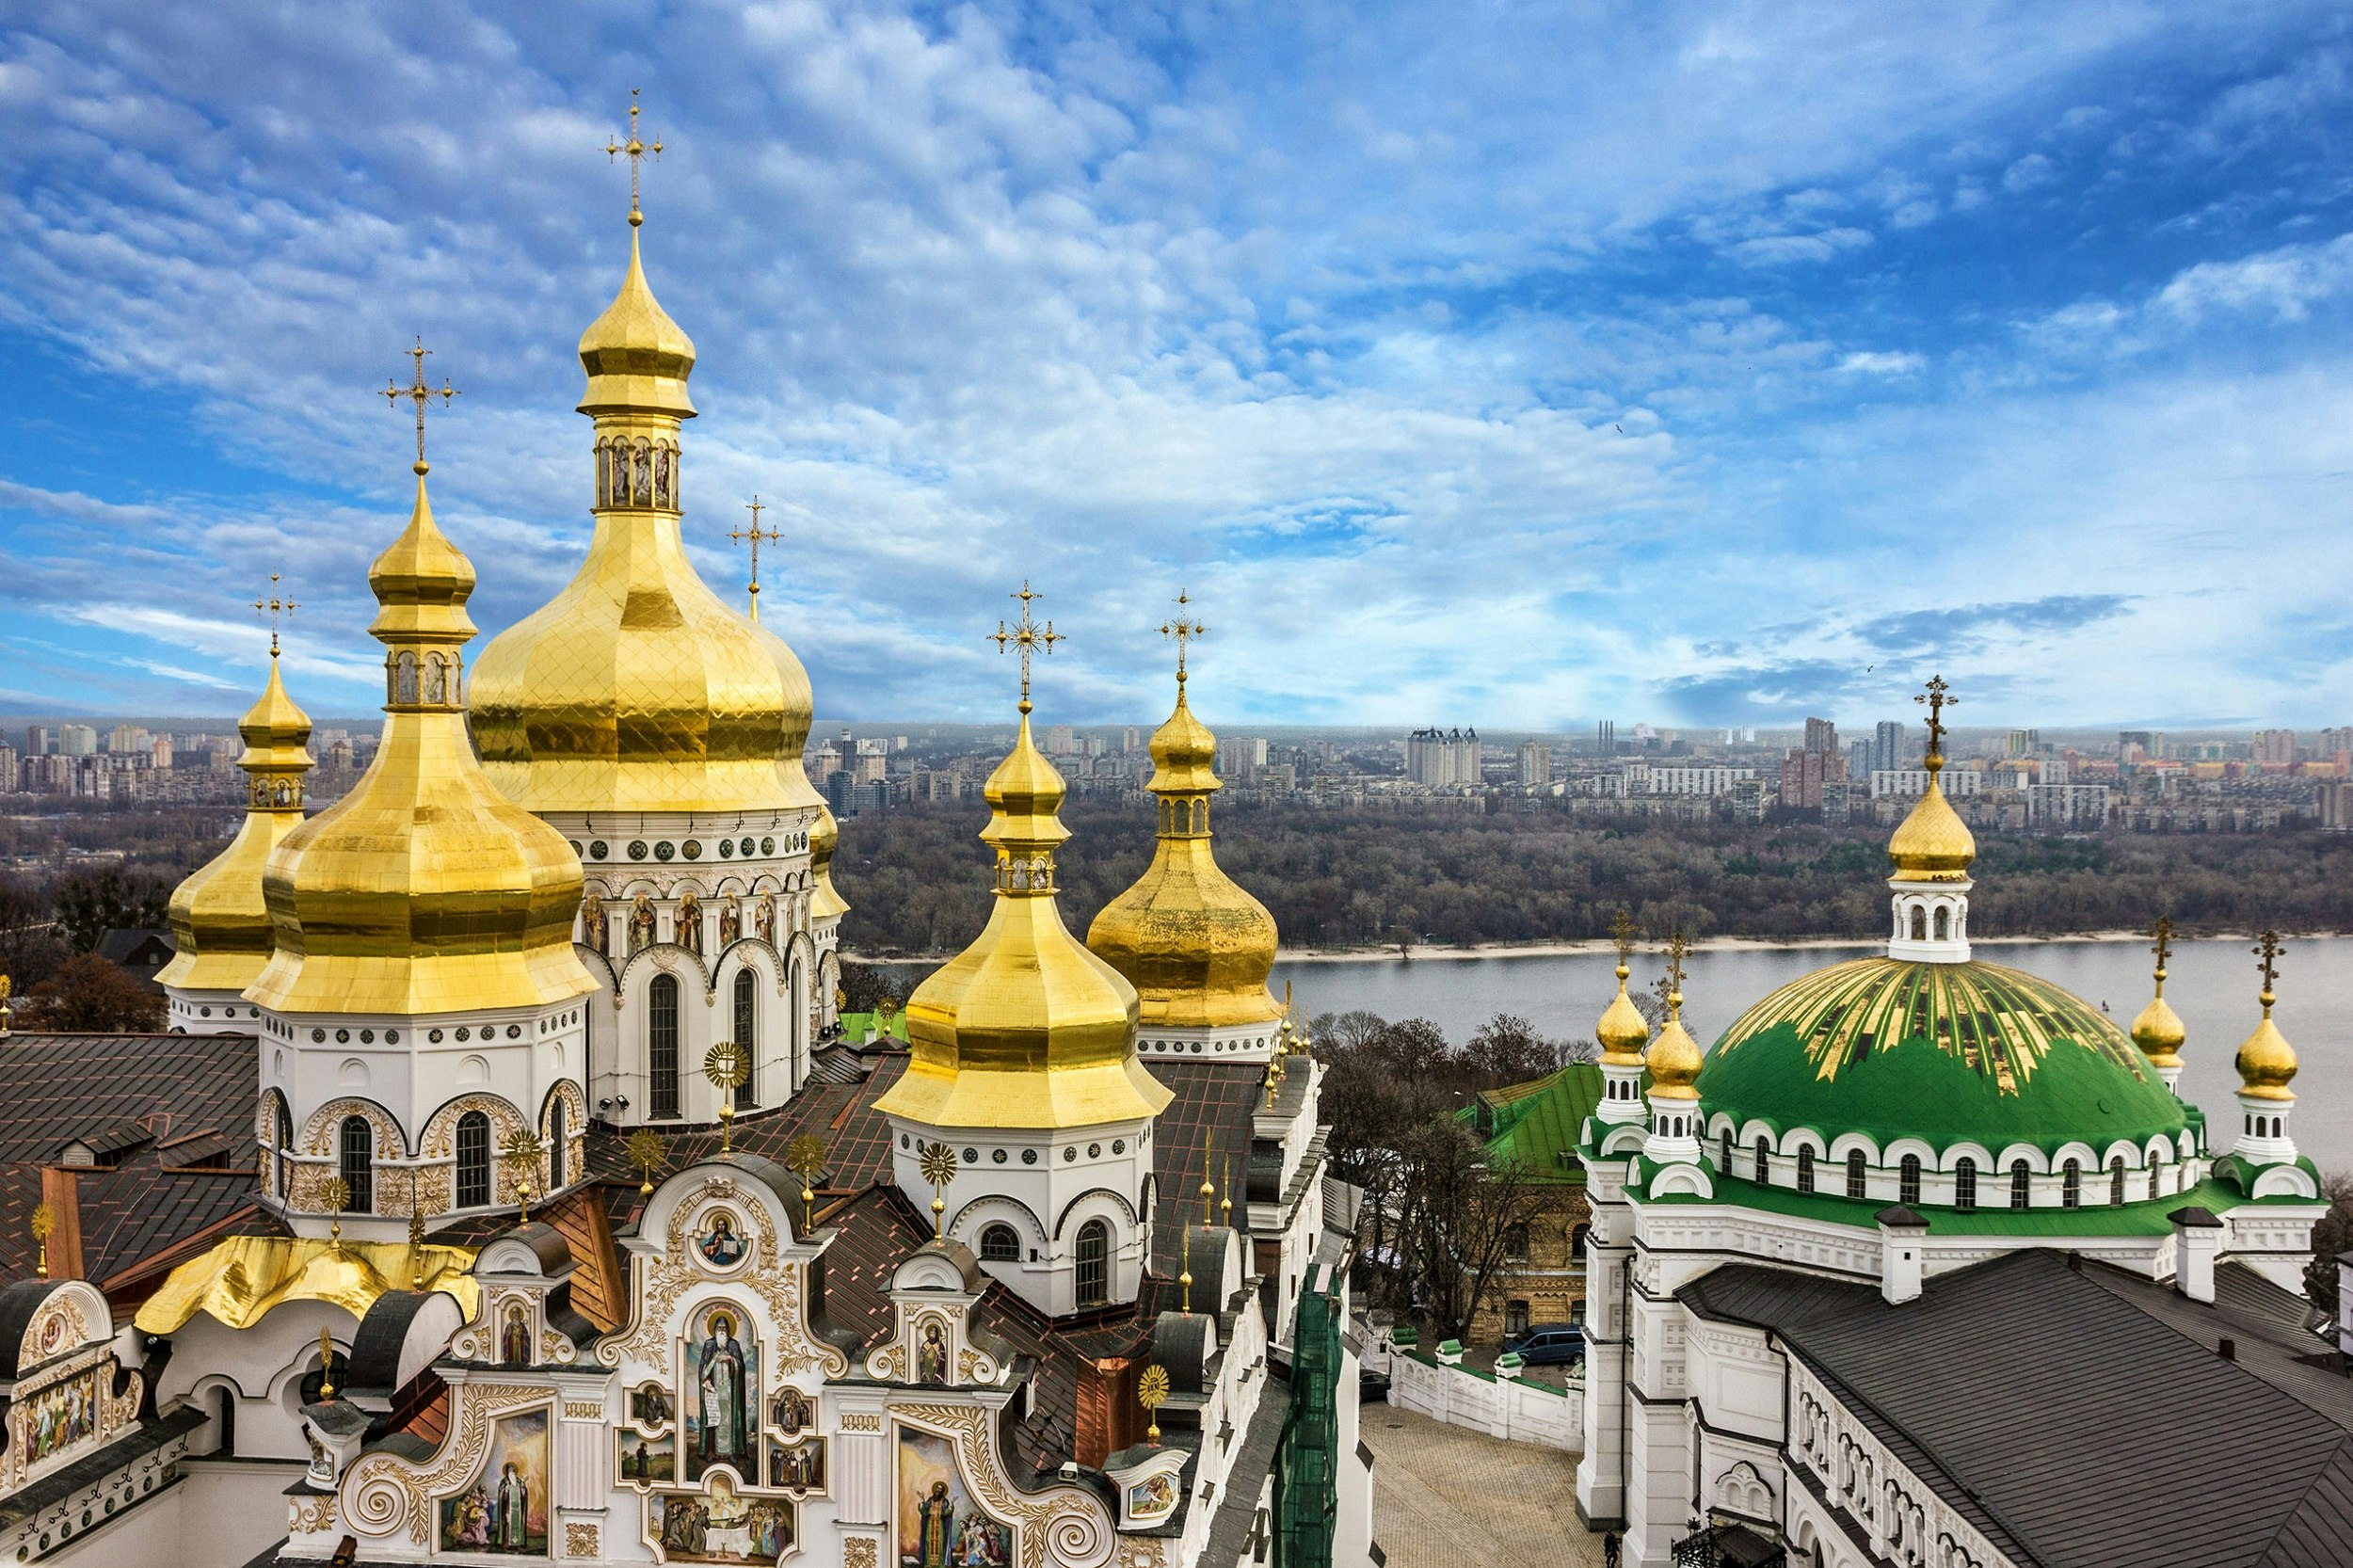 Five golden domes and one larger, flatter green dome, with a view beyond to a river at Kyevo-Pecherska Lavra in Kiev